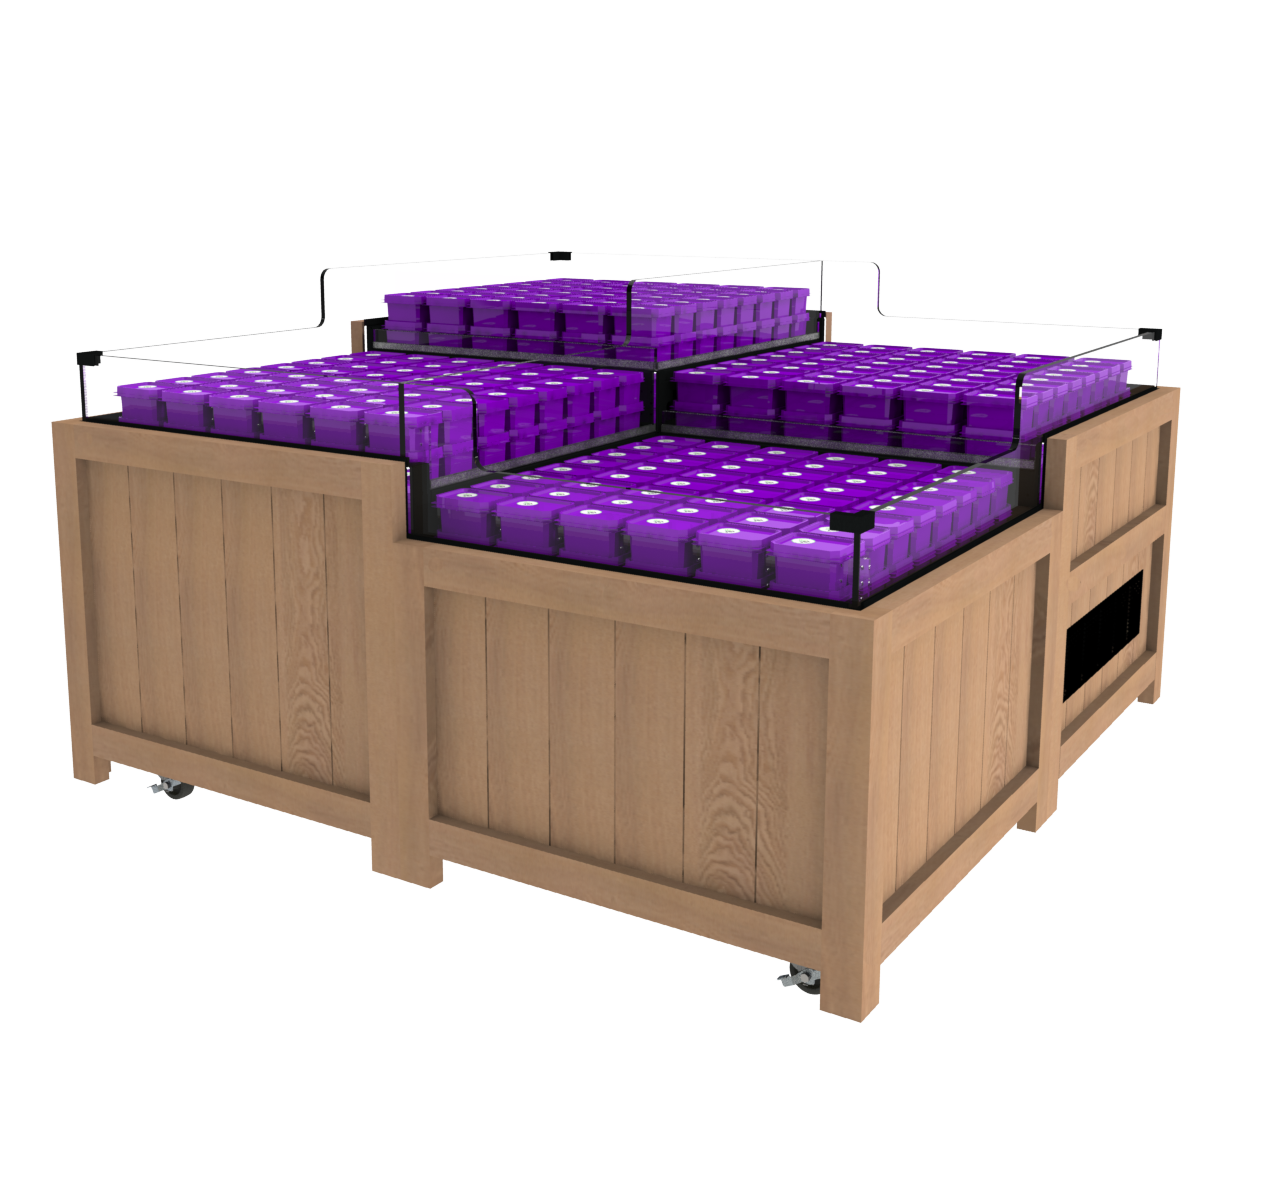 3-Tier Refrigerated Cases